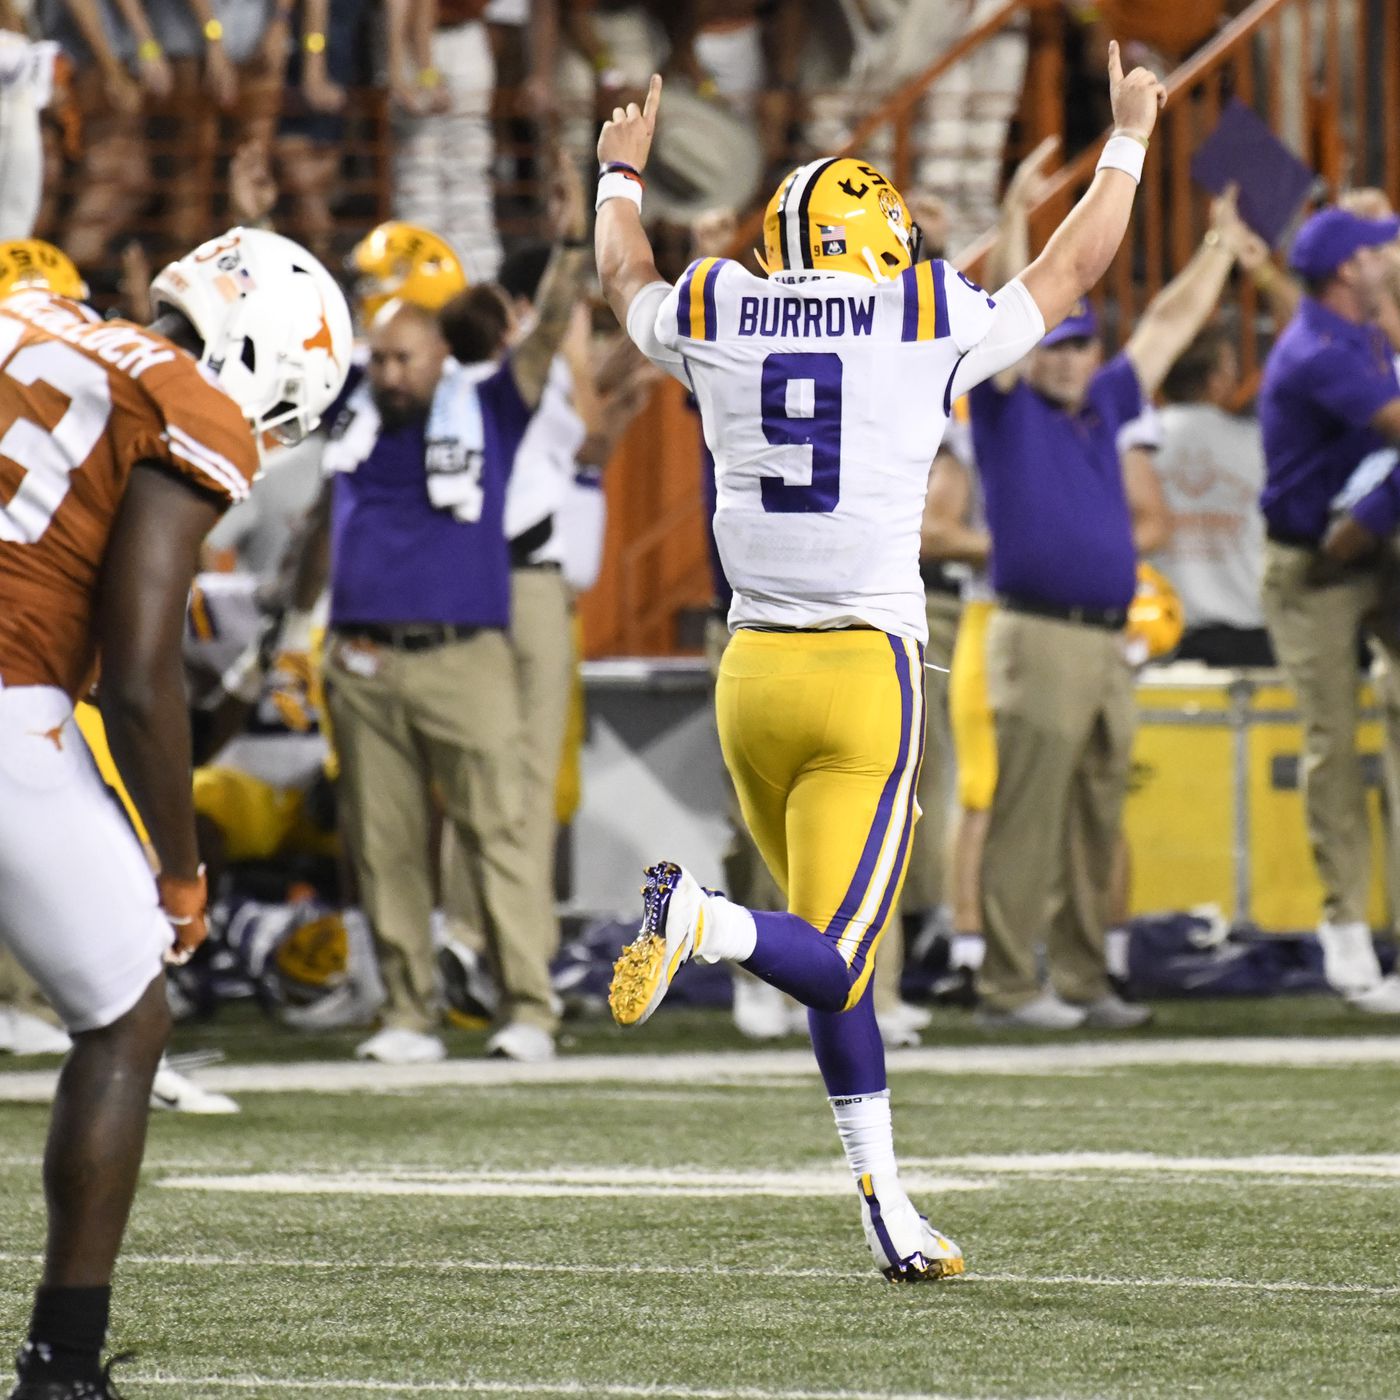 Inside the play: 3rd and 17 against LSU - Burnt Orange Nation